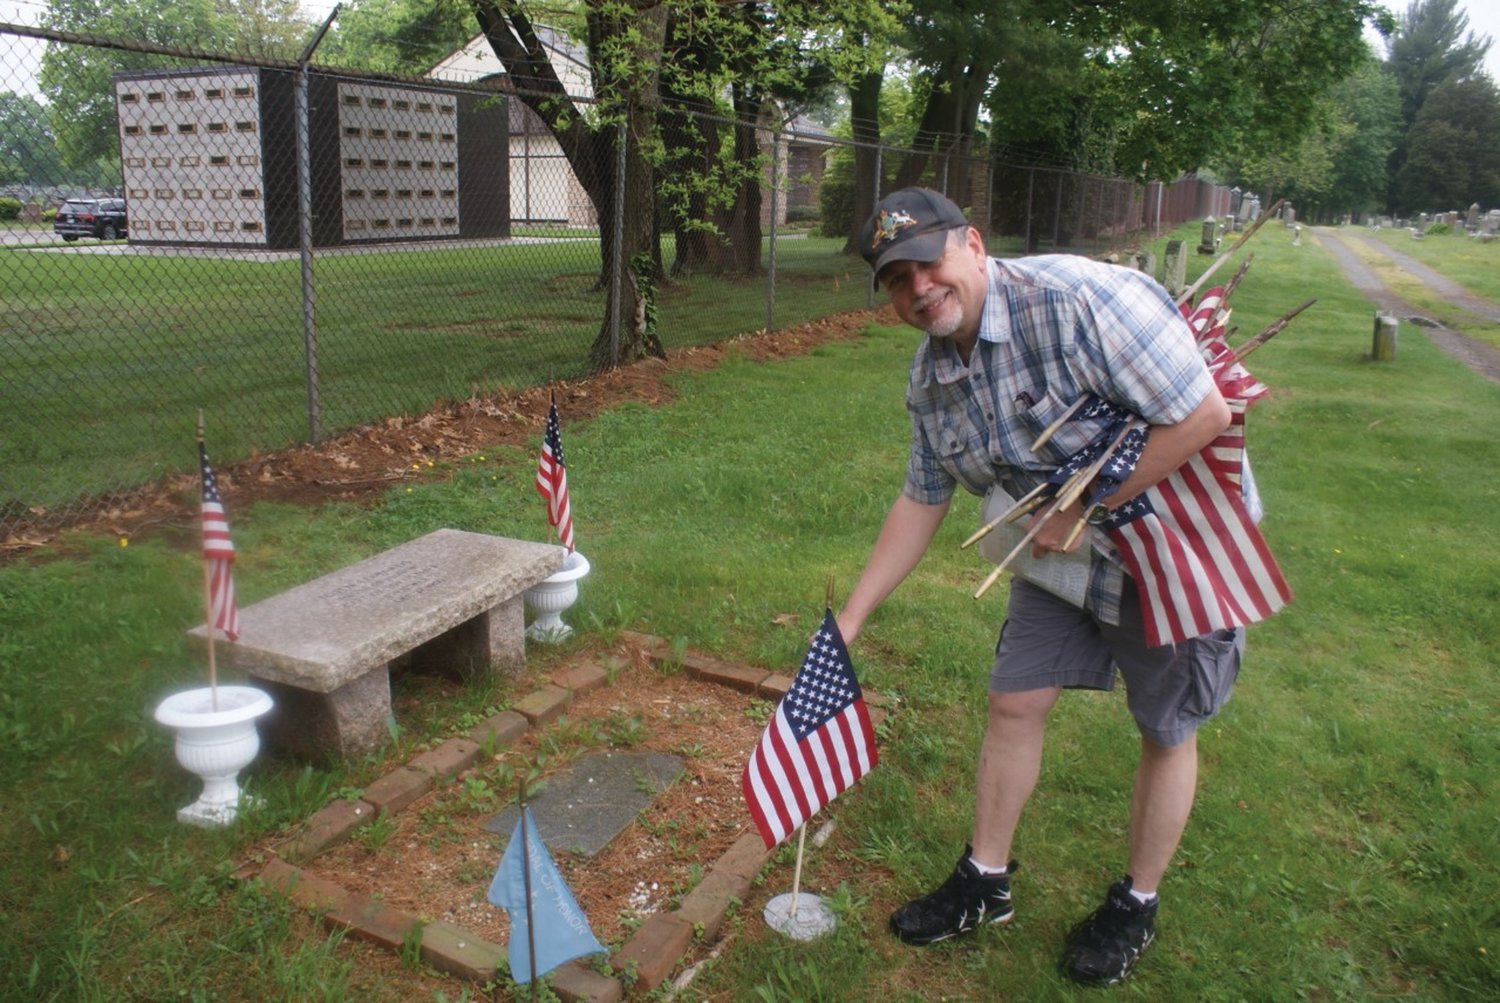 IN MEMORIAL: In Remembrance: Sons of the Union Civil War Veterans, Camp 7, was replacing American flags at all Civil War Veterans headstones. Ron Barnes, Camp 7 Commander, placed a flag at the headstone of John Edwards Medal of Capt. of TOP US Navy Civil War.